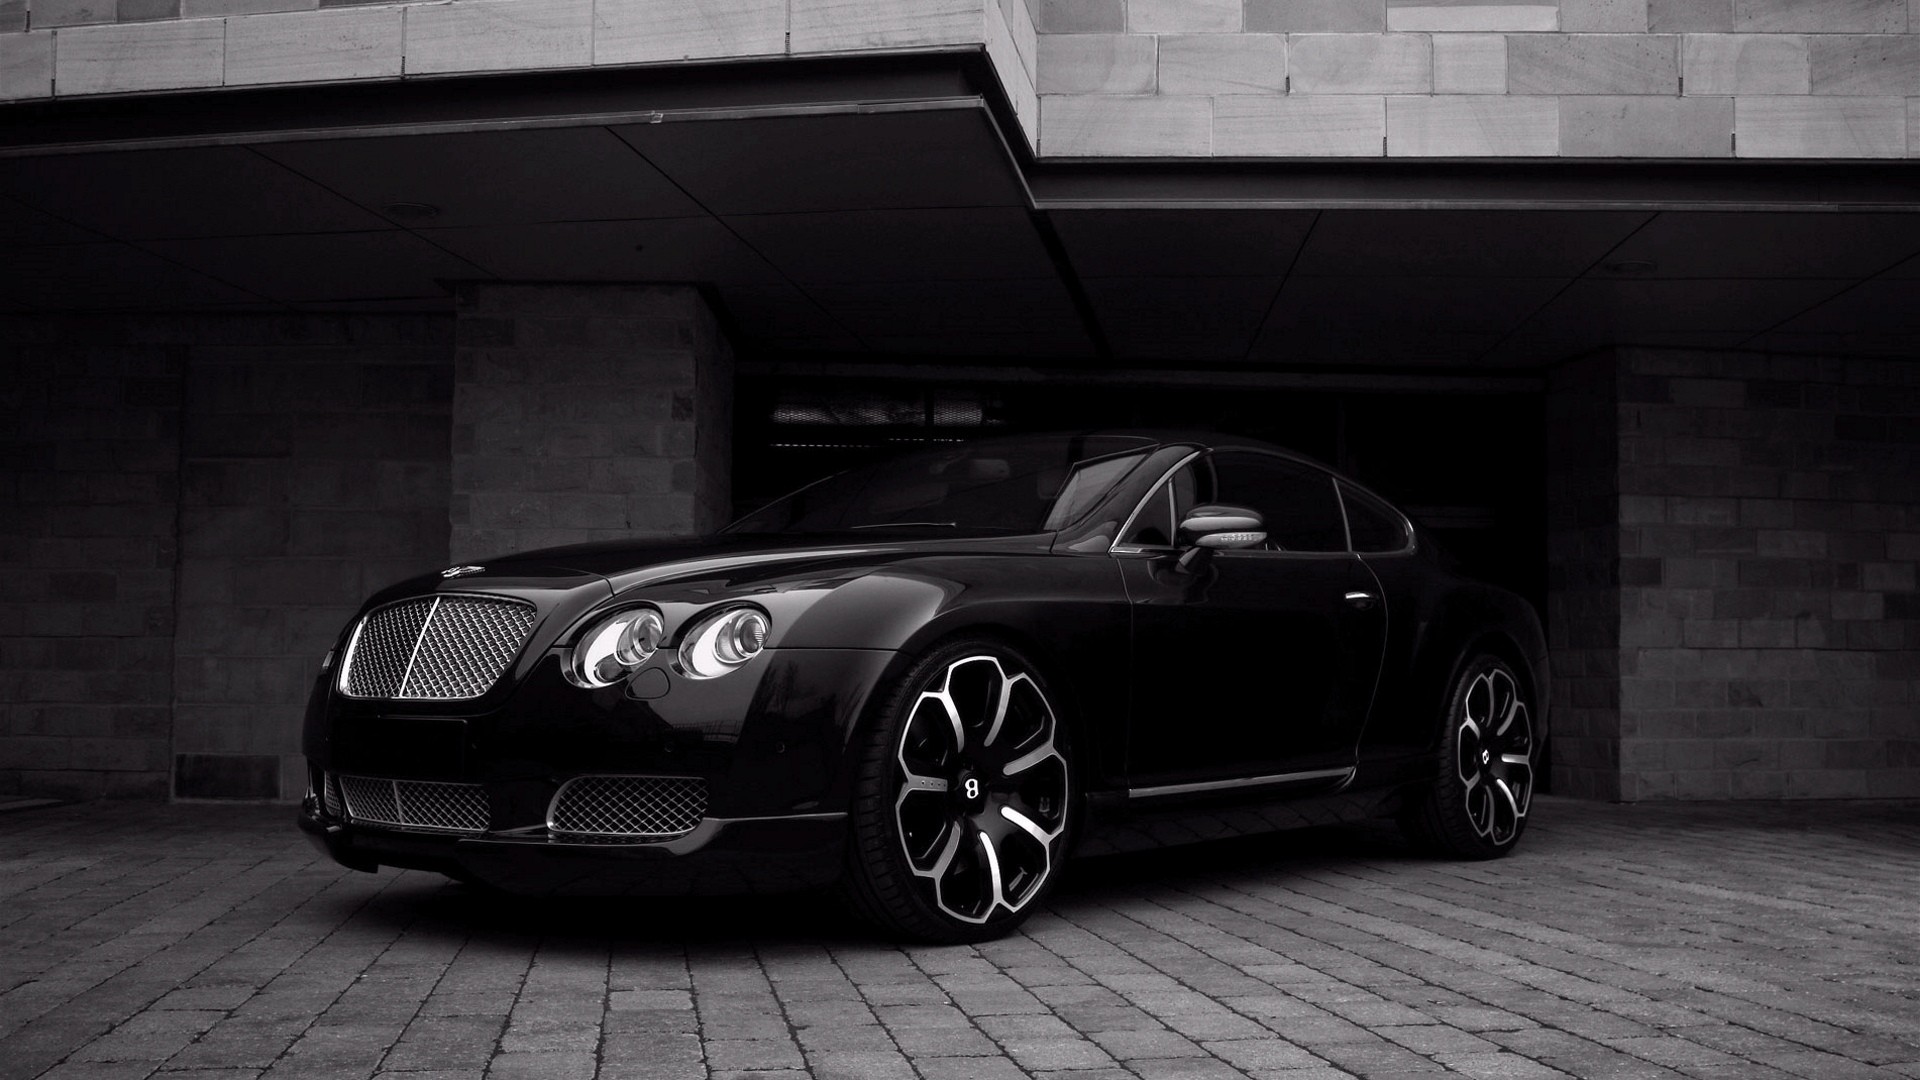 cars, Grayscale, Bentley Wallpapers HD / Desktop and Mobile Backgrounds